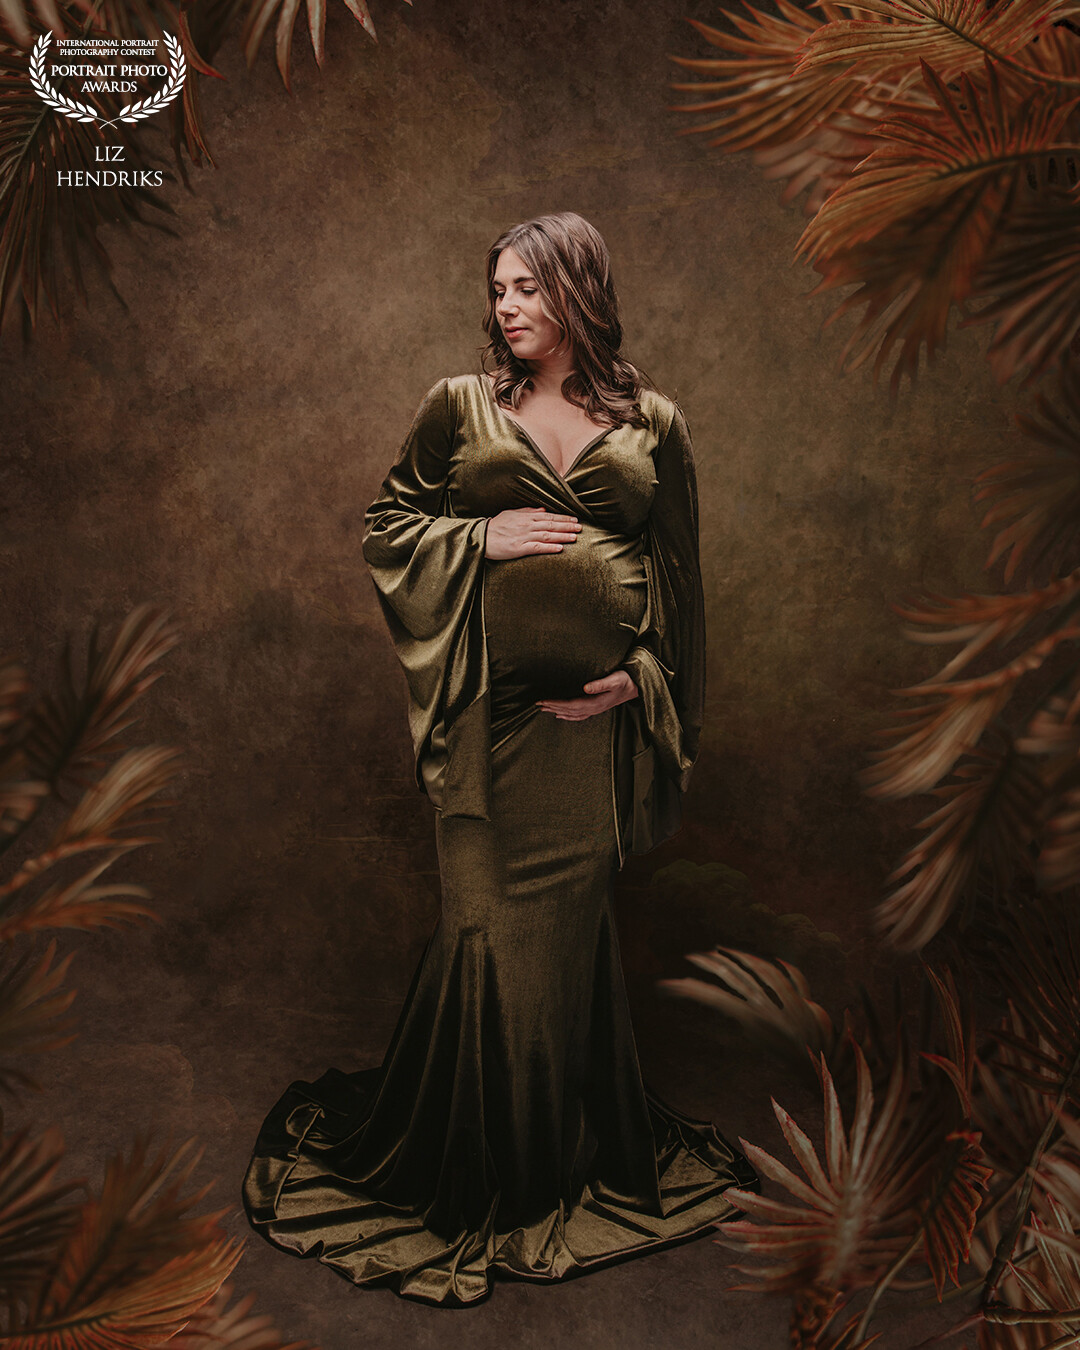 I've been wanting to take a photo with a fine art feeling with palm leaves for a while now. A beautiful pregnant model came into the studio for a shoot and I took my chance.